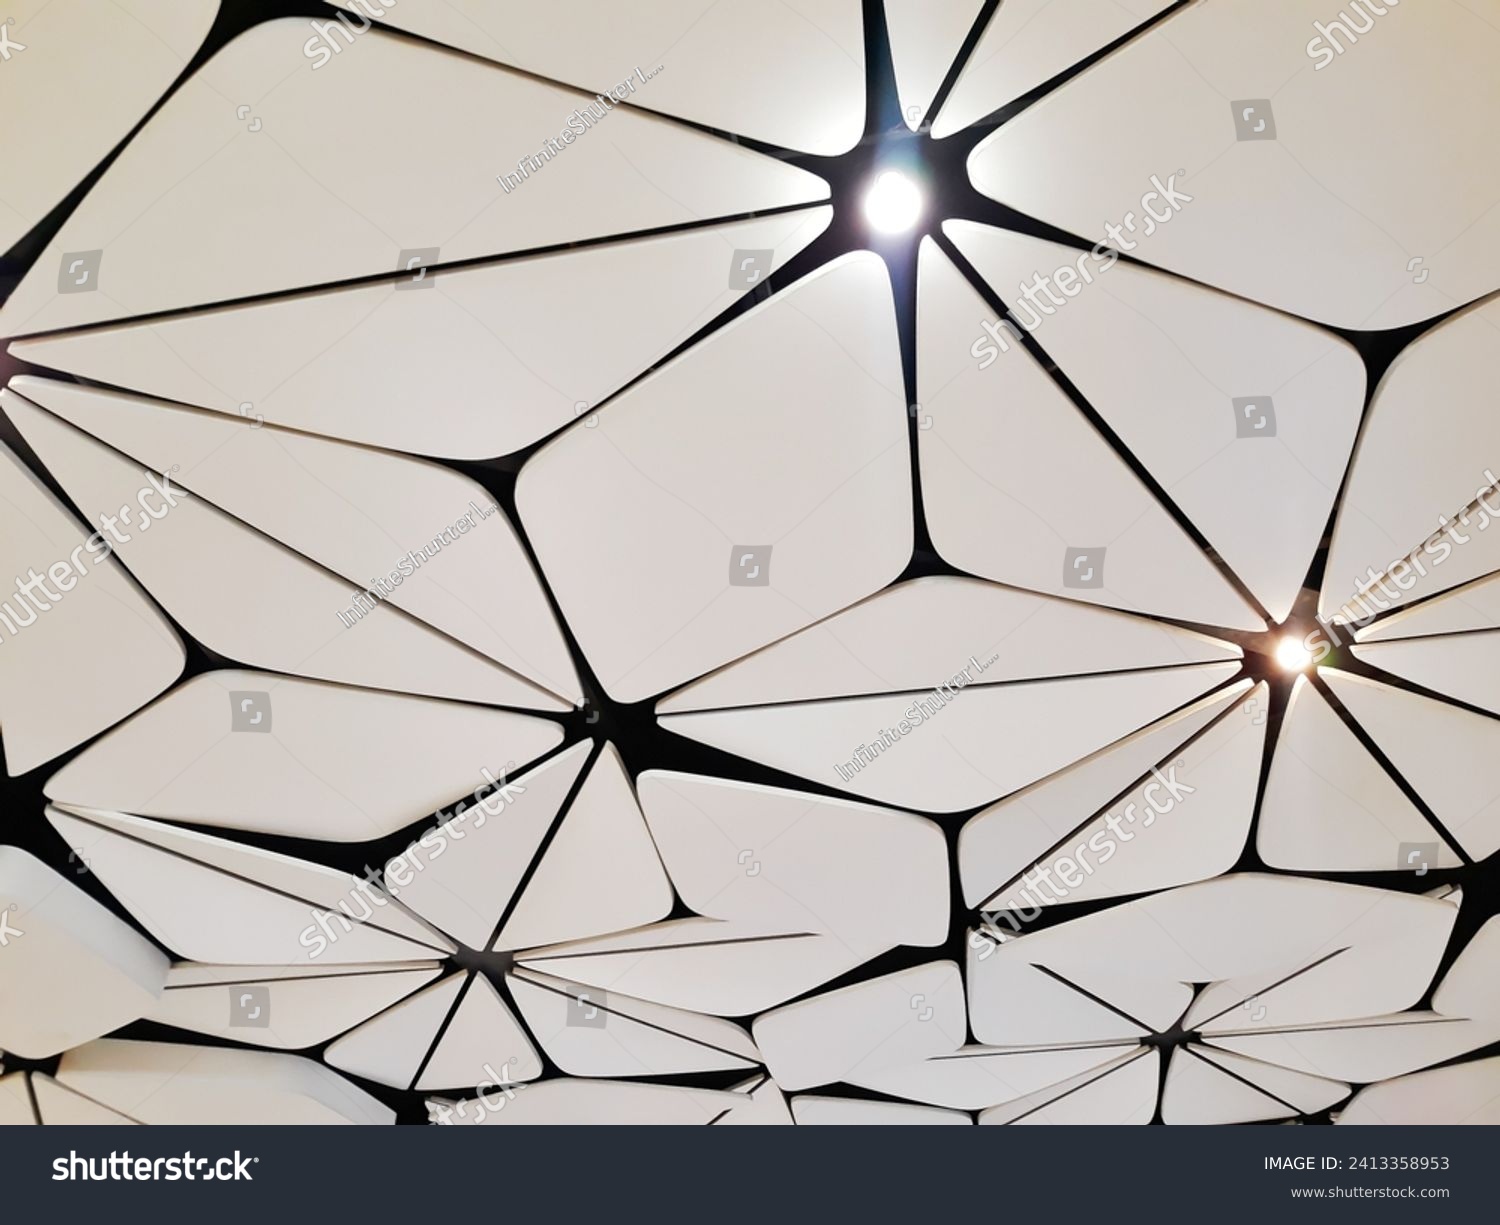 Beautiful acoustic ceiling panel. White decorative ceiling board i a building with lighting rays.